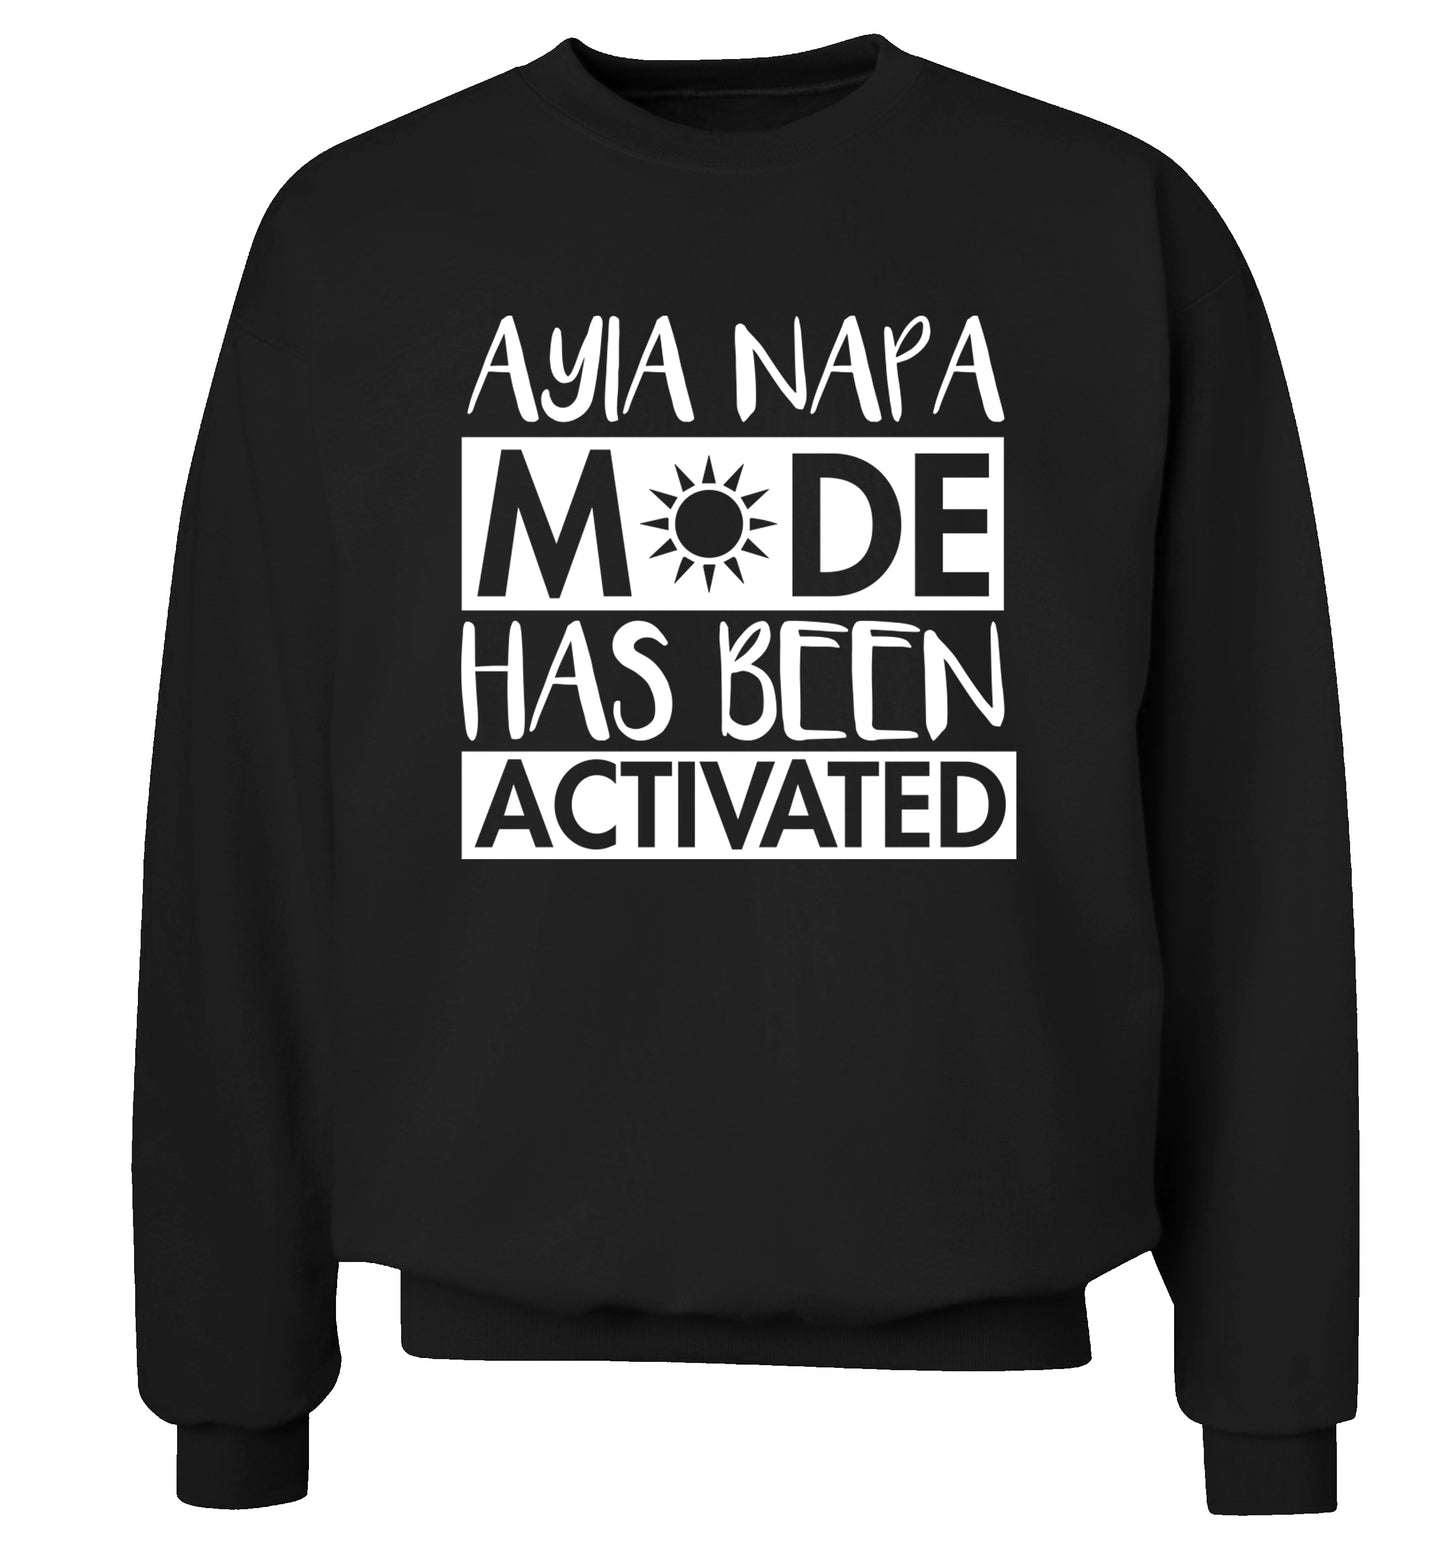 Ayia Napa mode has been activated Adult's unisex black Sweater 2XL